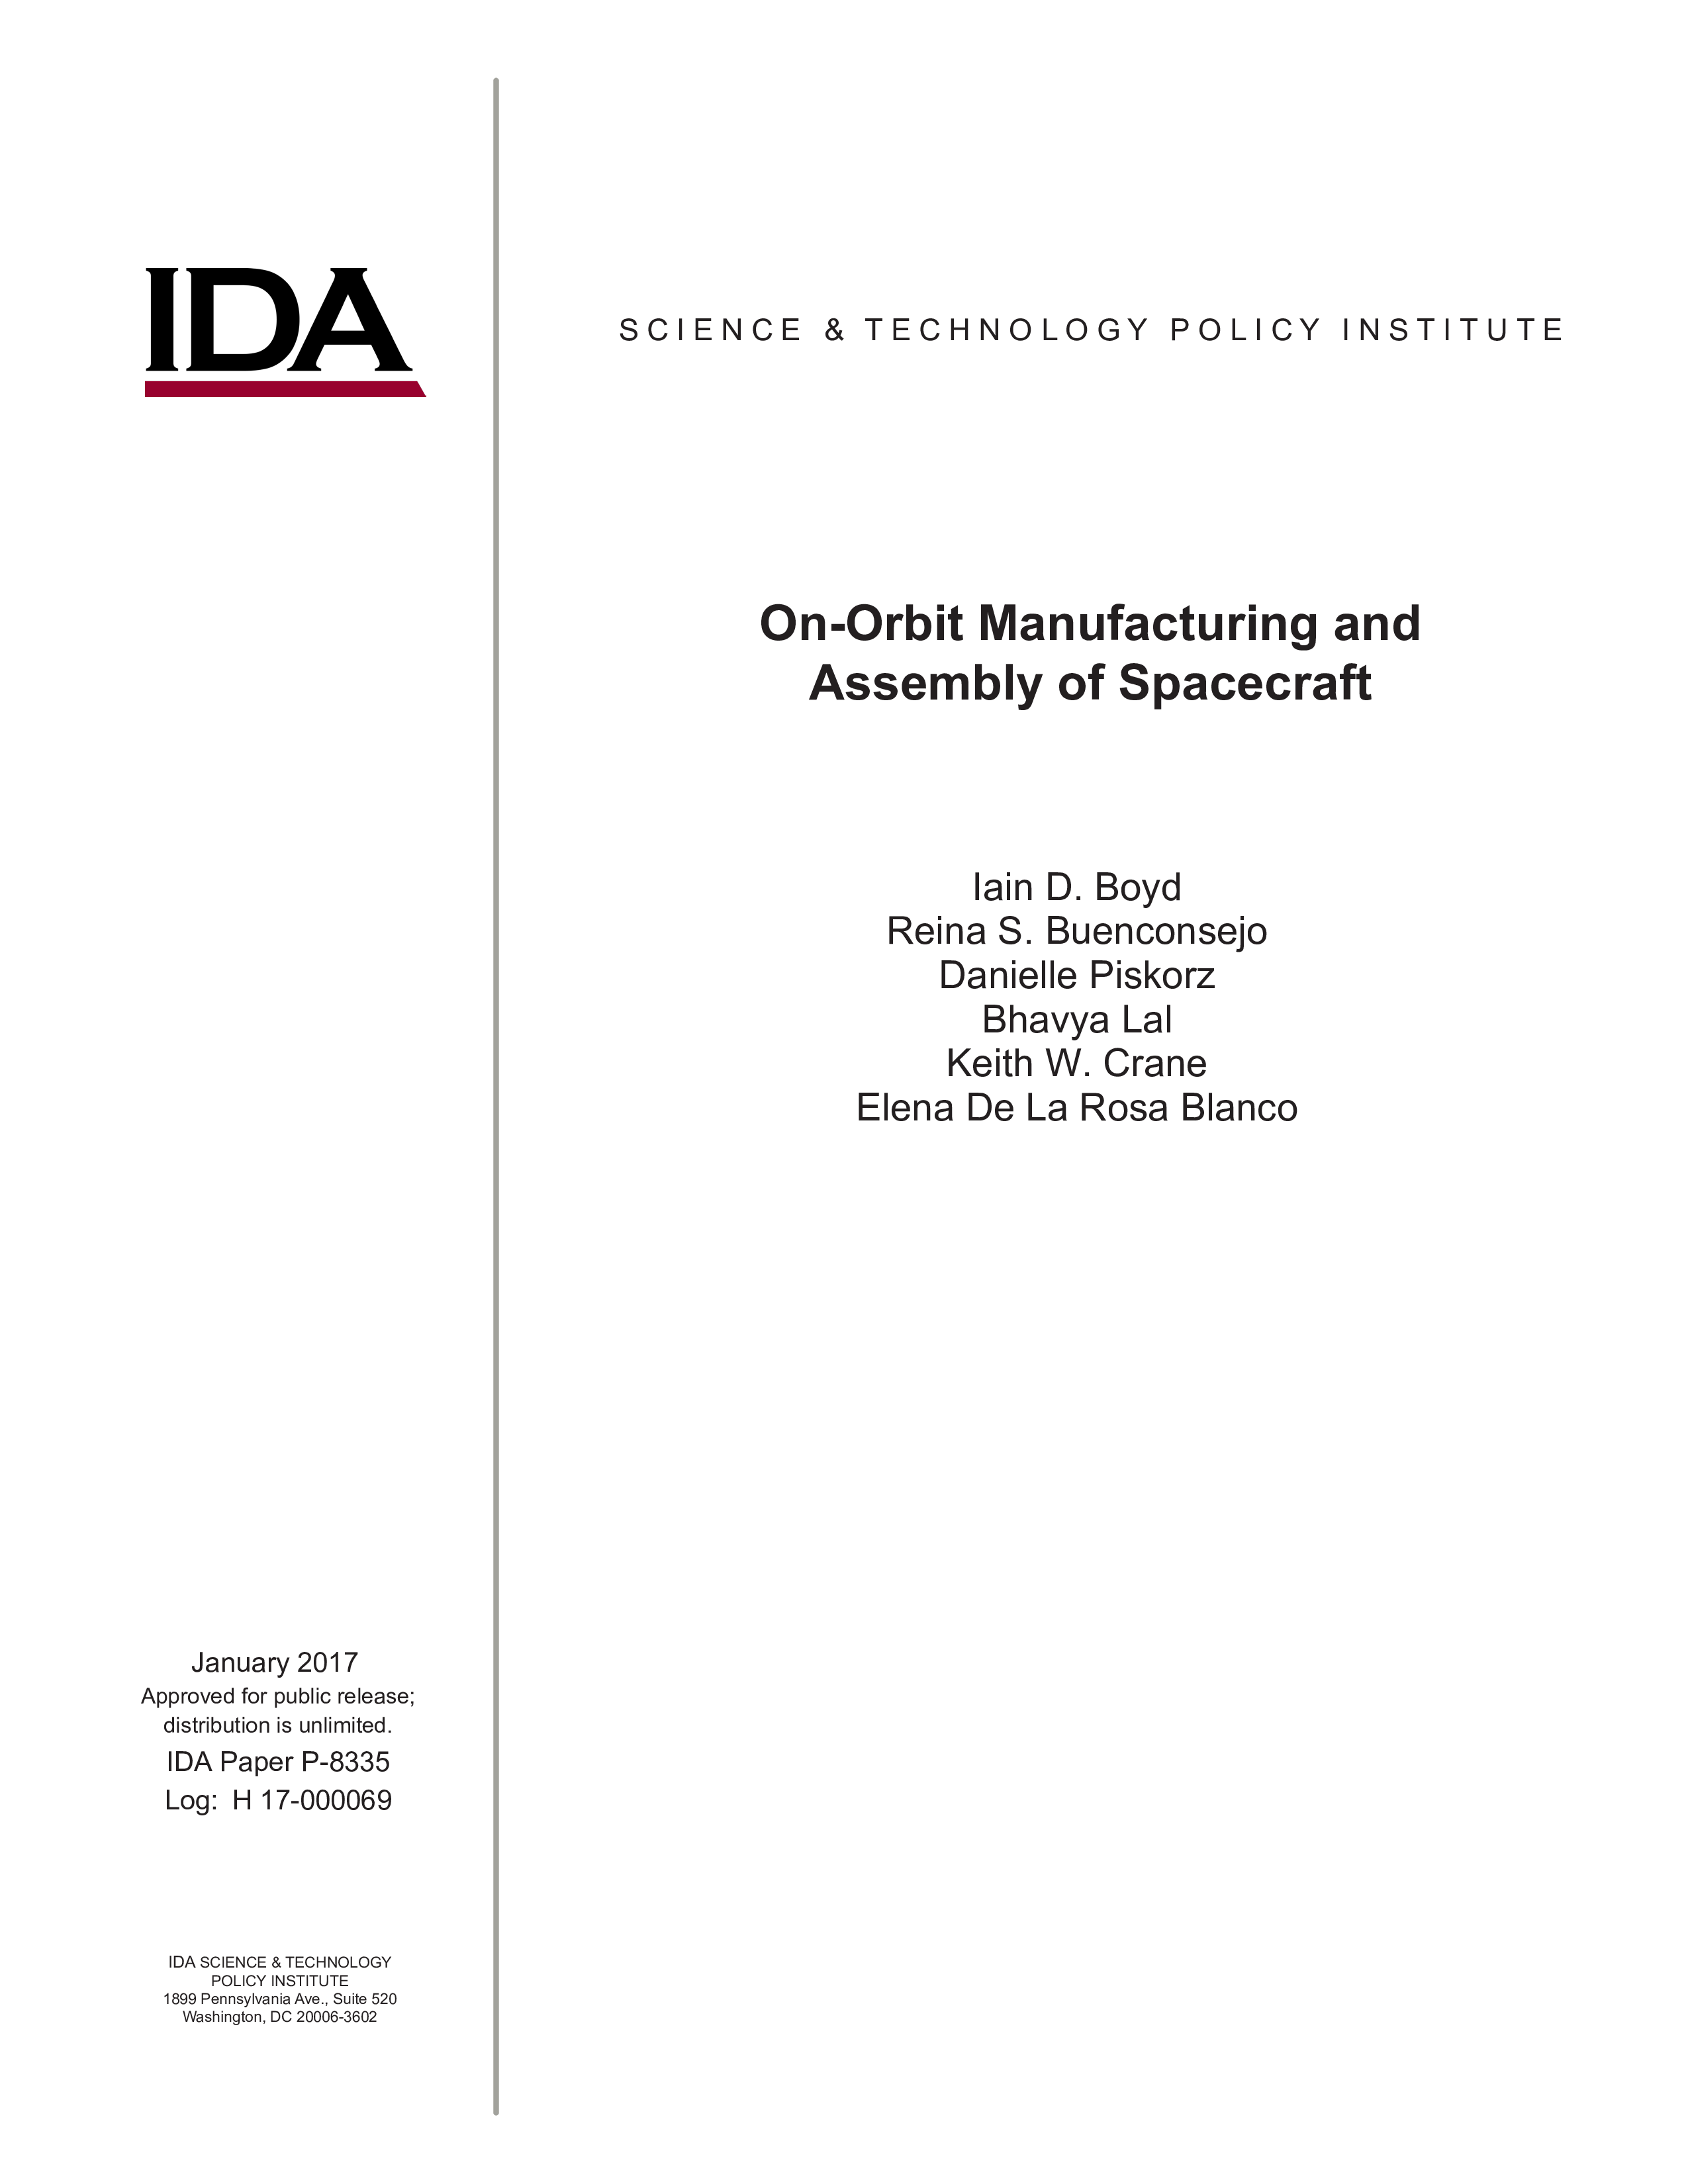 On-Orbit Manufacturing and Assembly of Spacecraft